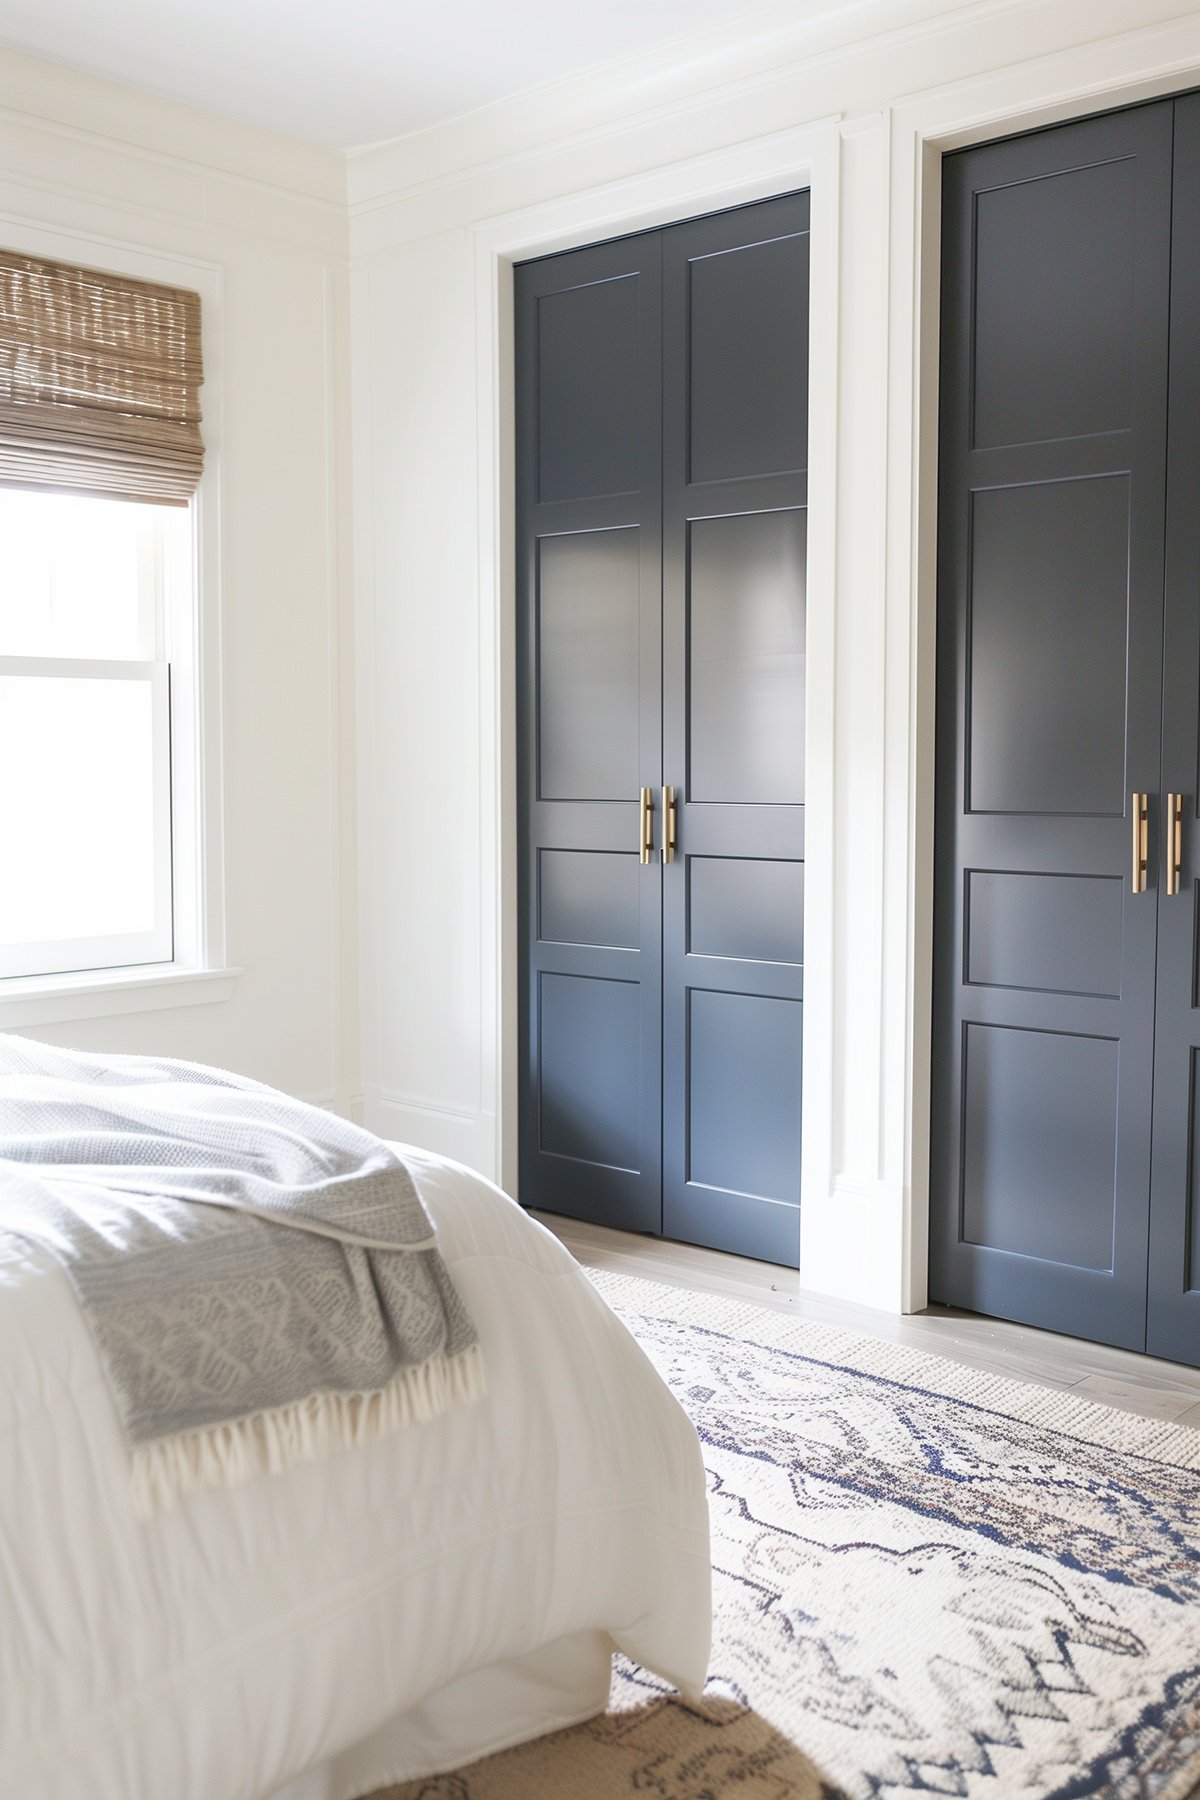 A bedroom with closet doors painted Sherwin Williams Naval.